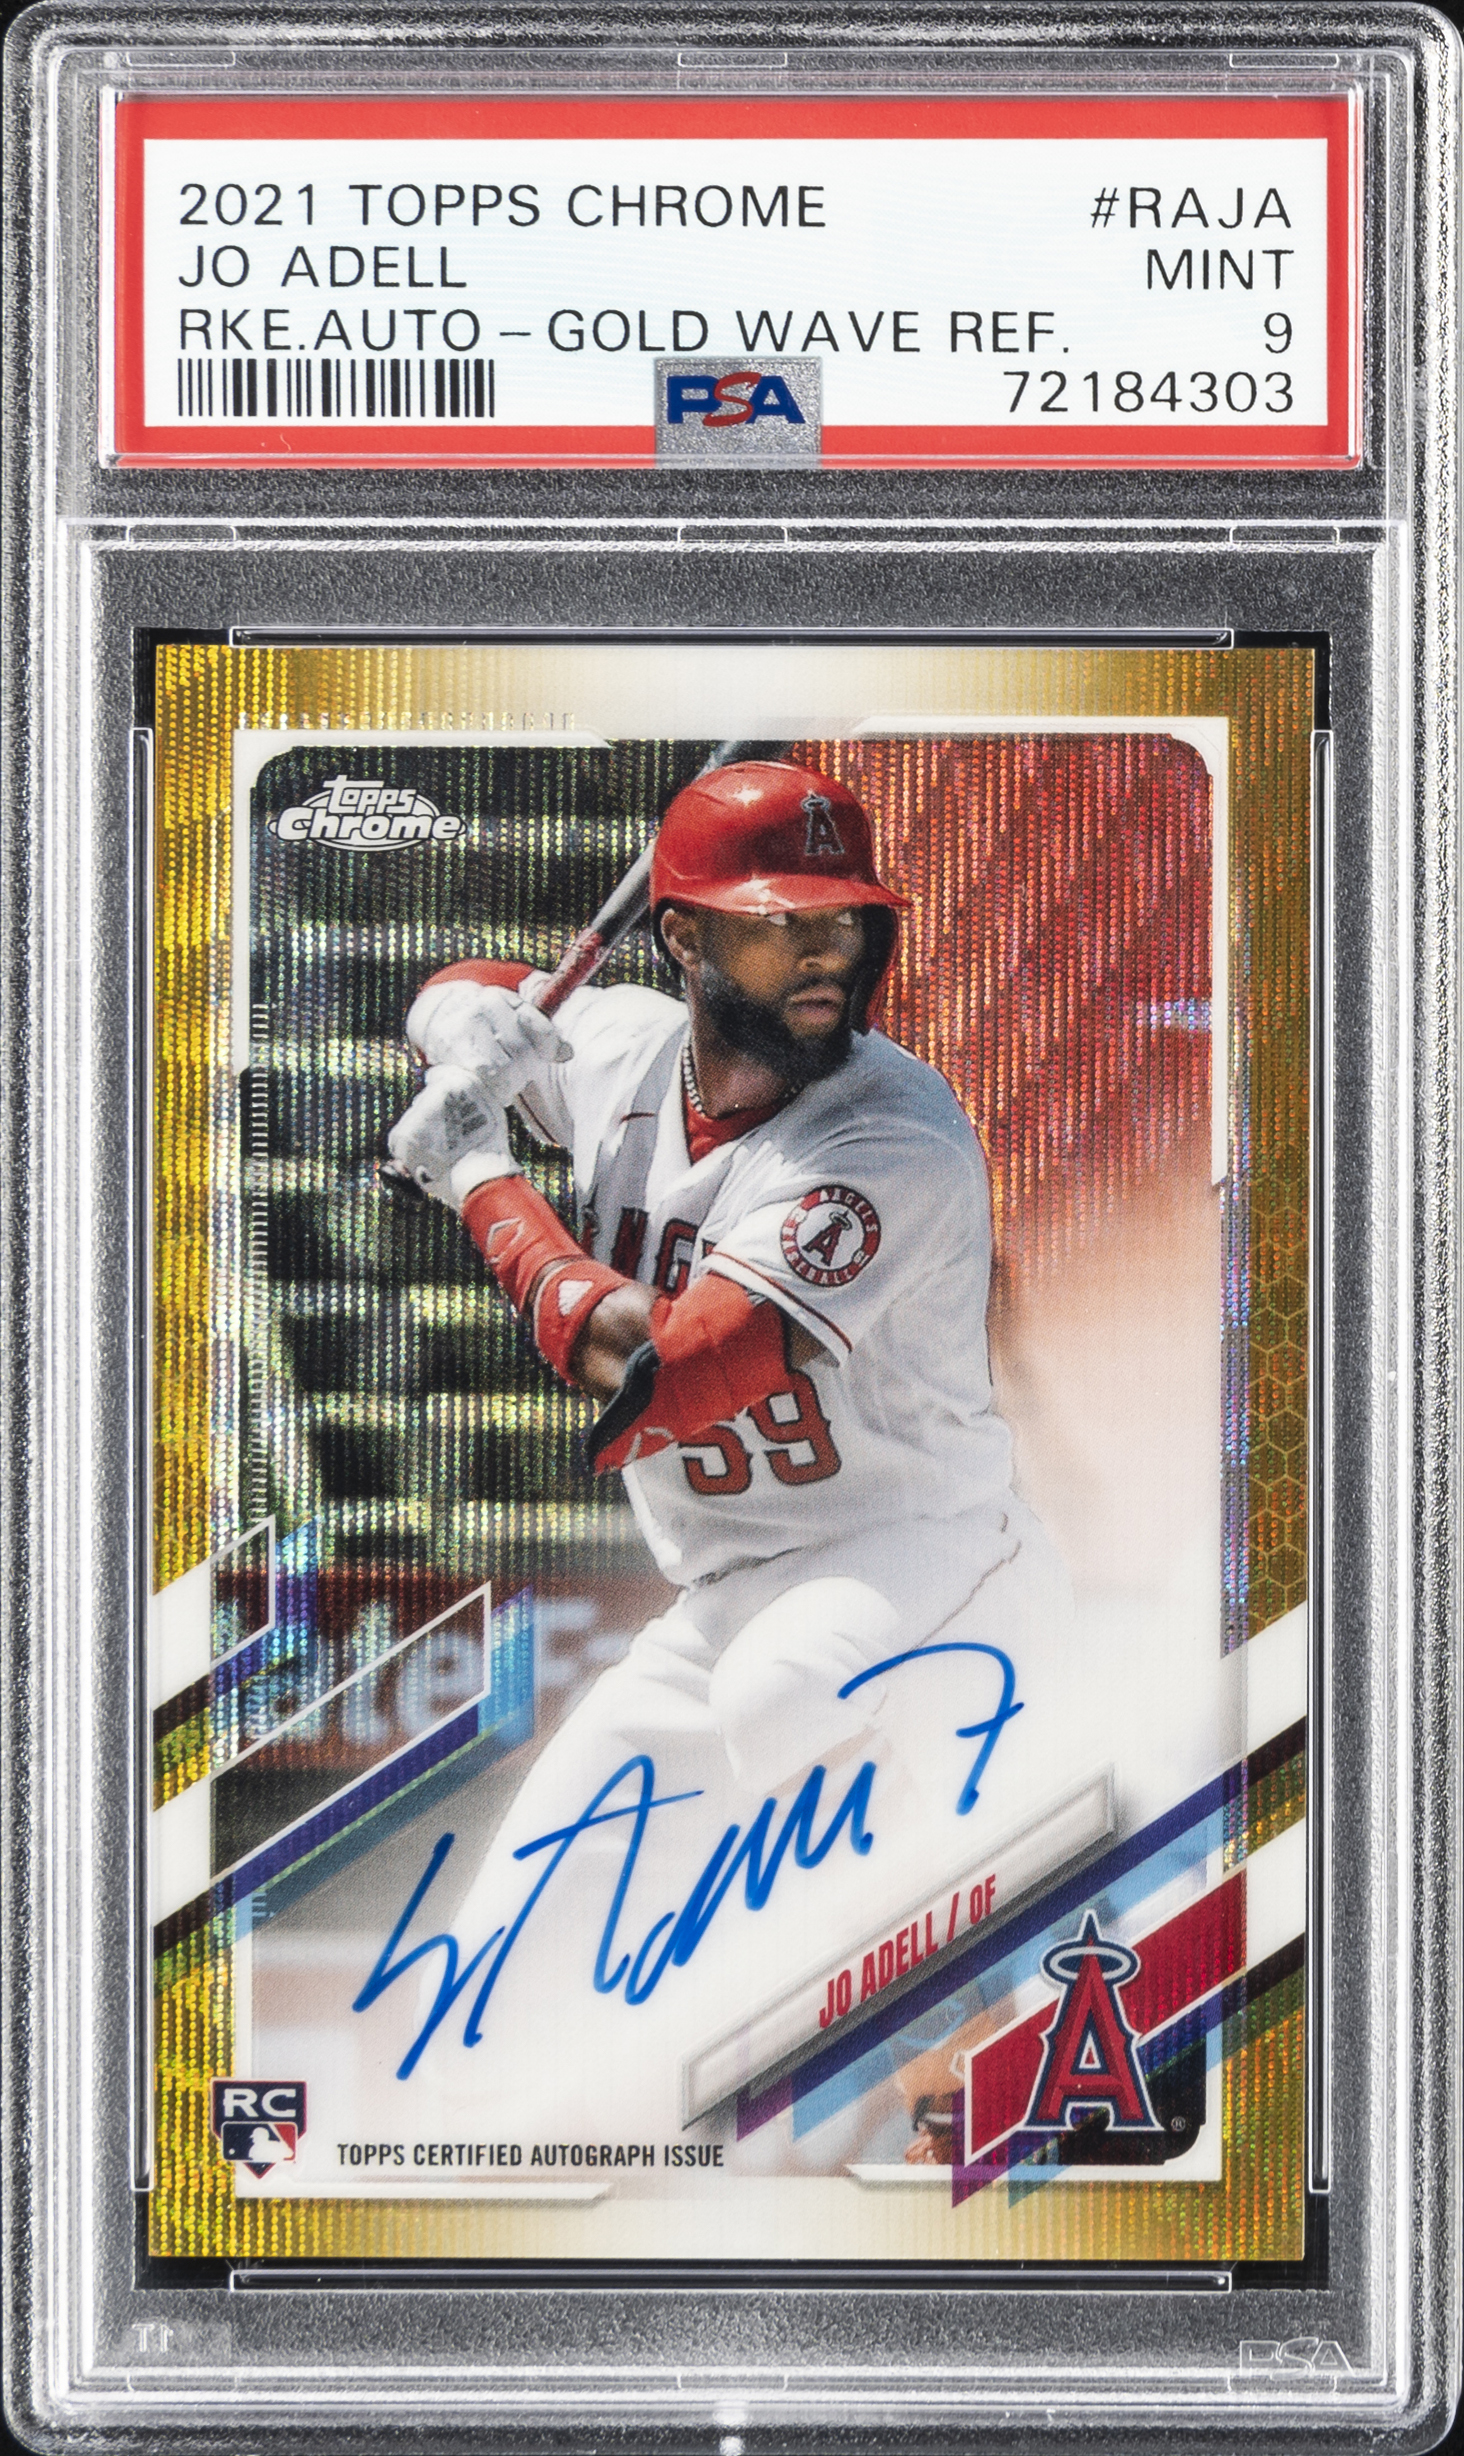 2021 Topps Chrome Rookie Autographs Gold Wave Refractor #RAJA Jo Adell Signed Rookie Card (#29/50) – PSA MINT 9